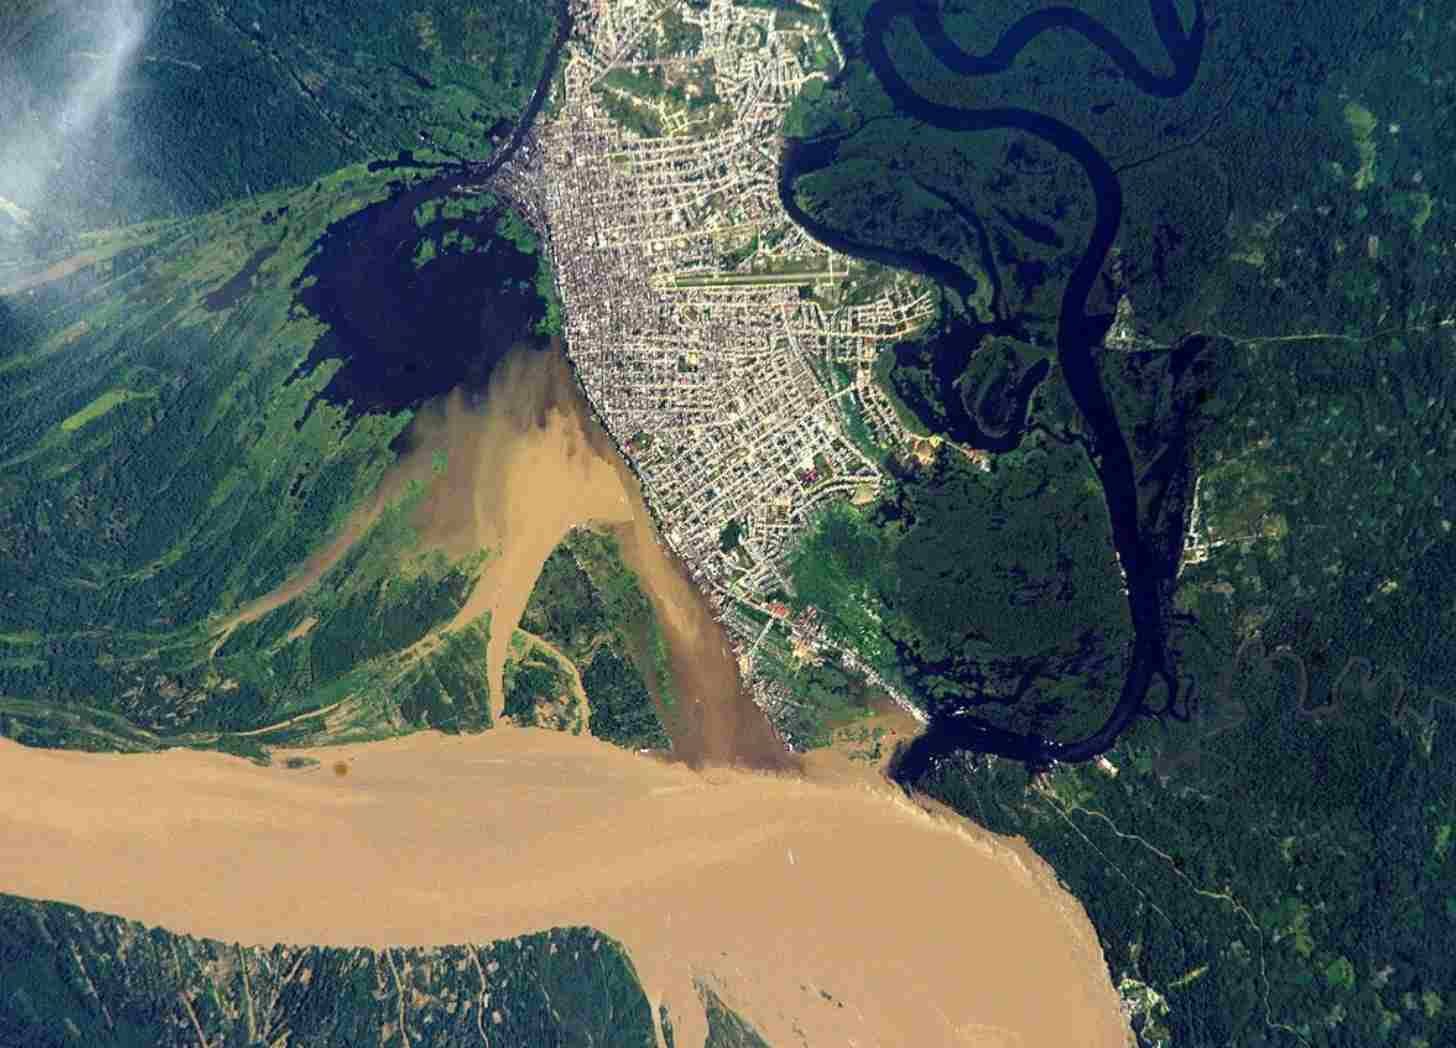 A satllite image of the grey streets of the city of Iquitos on the edge of waterways flowing into a huge brown river, surrounded by green forest.